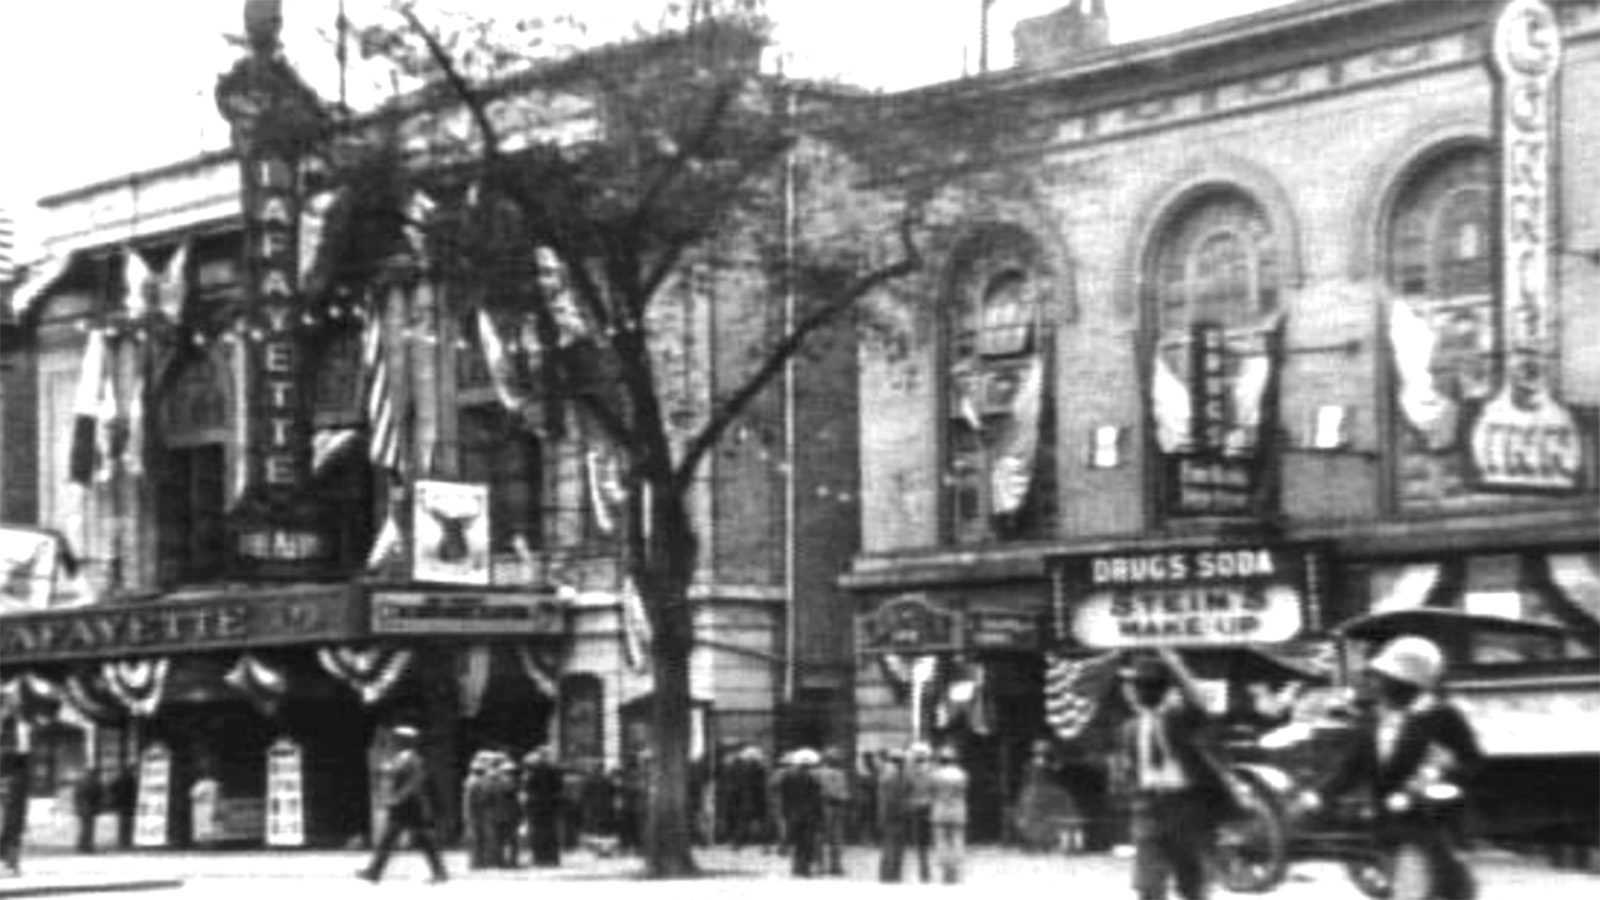 A black-and-white photo of a tall chestnut tree located in front of a building with “Lafayette Theater” signage and a building with “Connie’s Inn” signage on their fronts. Black civilians in business suits congregate in small groups near the tree while others walk along the street.   